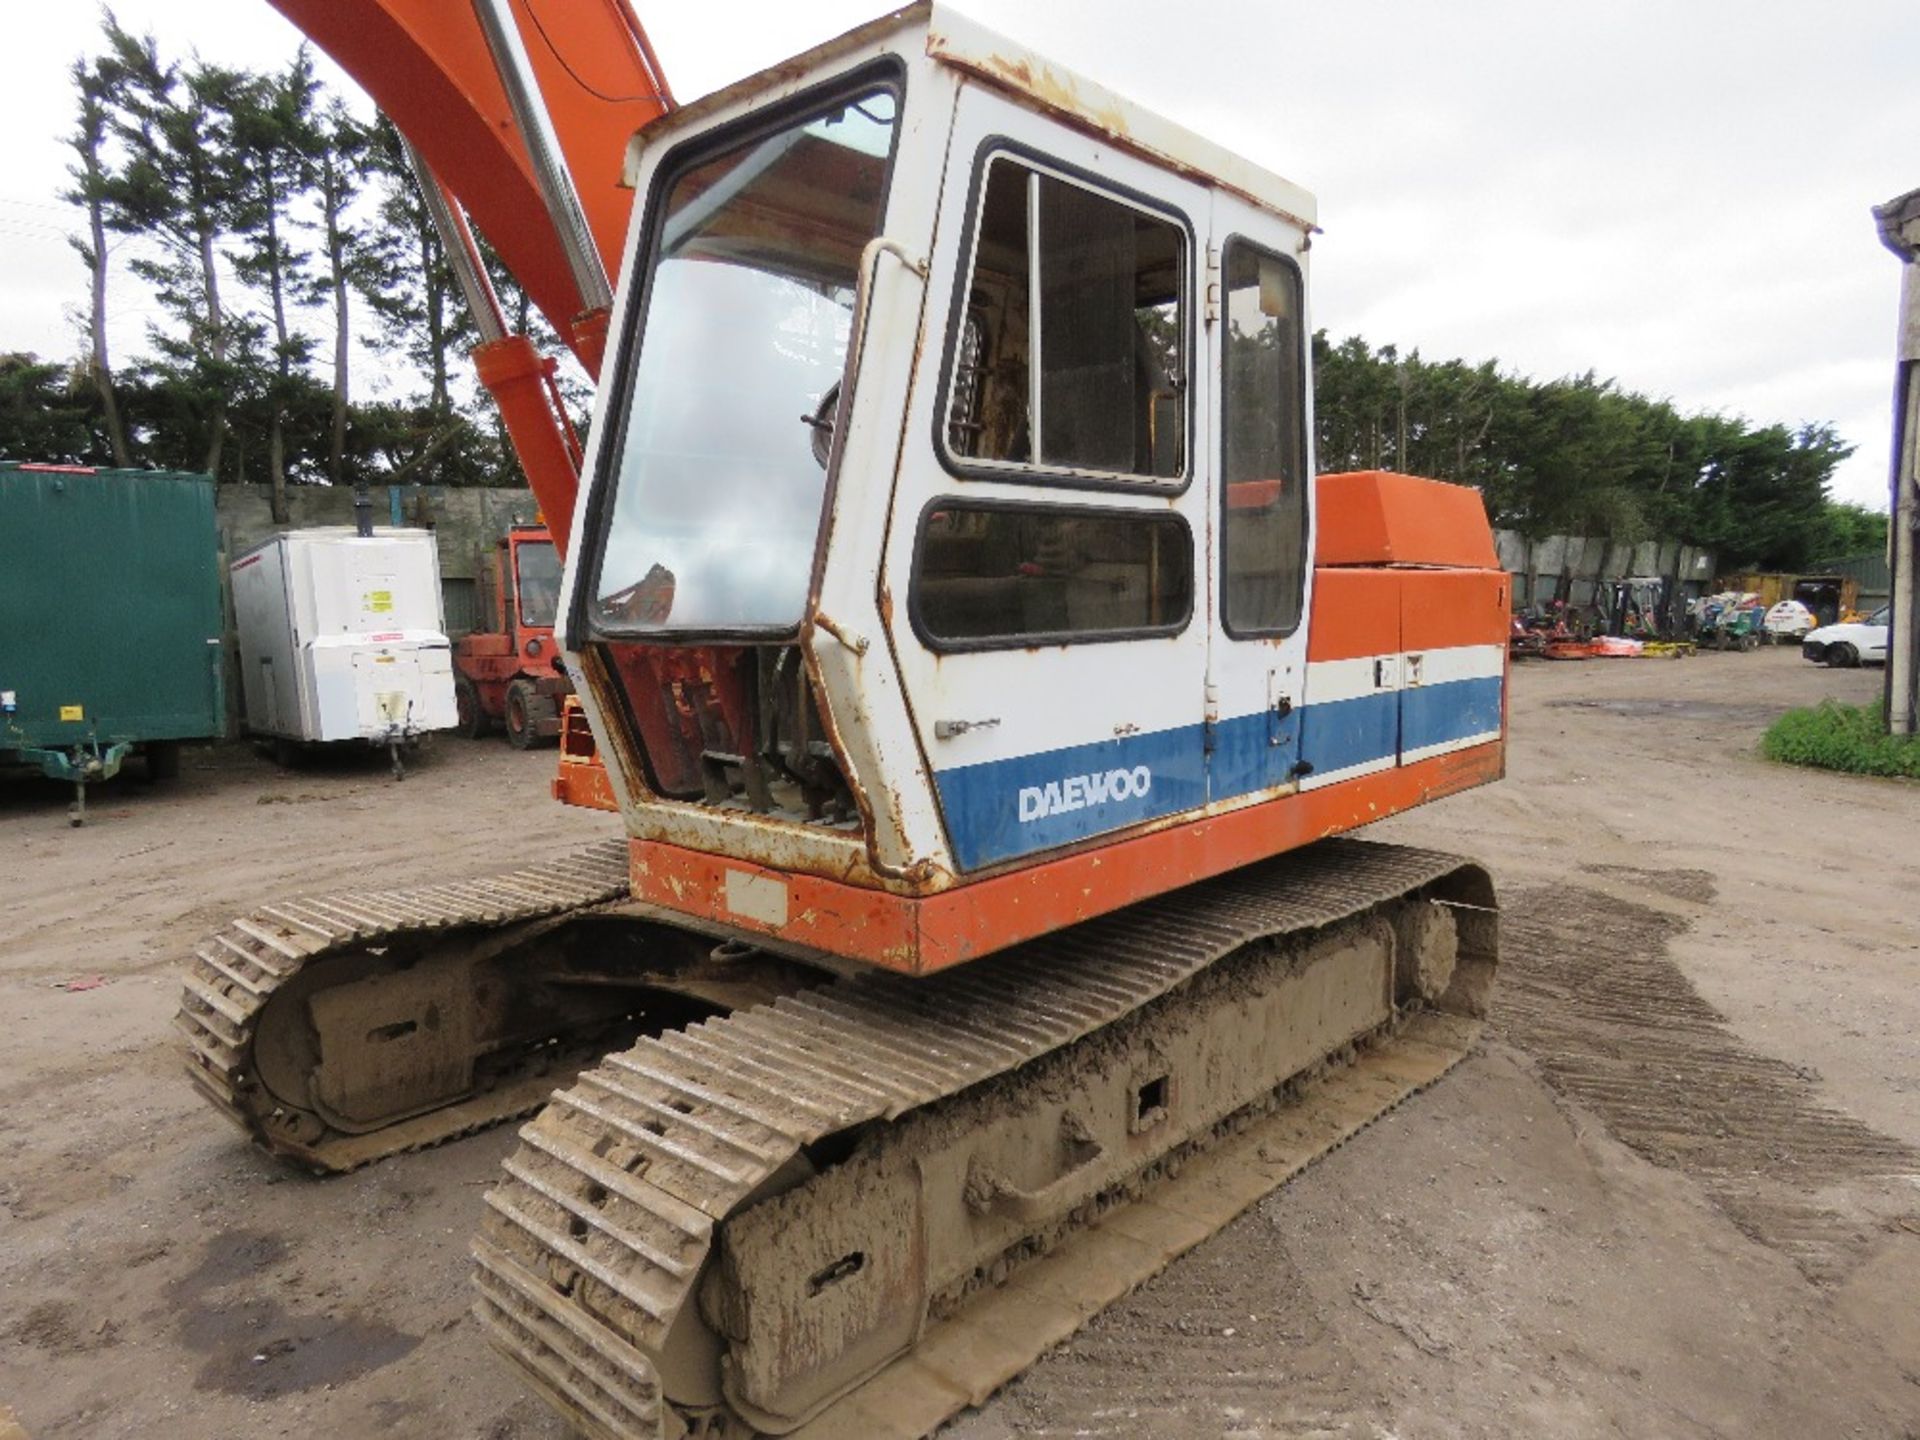 DAEWOO DH130 STEEL TRACKED EXCAVATOR, 13 TONNE RATED, SUPPLIED WITH 2 BUCKETS (6FT AND 3FT). SN:010 - Image 4 of 11